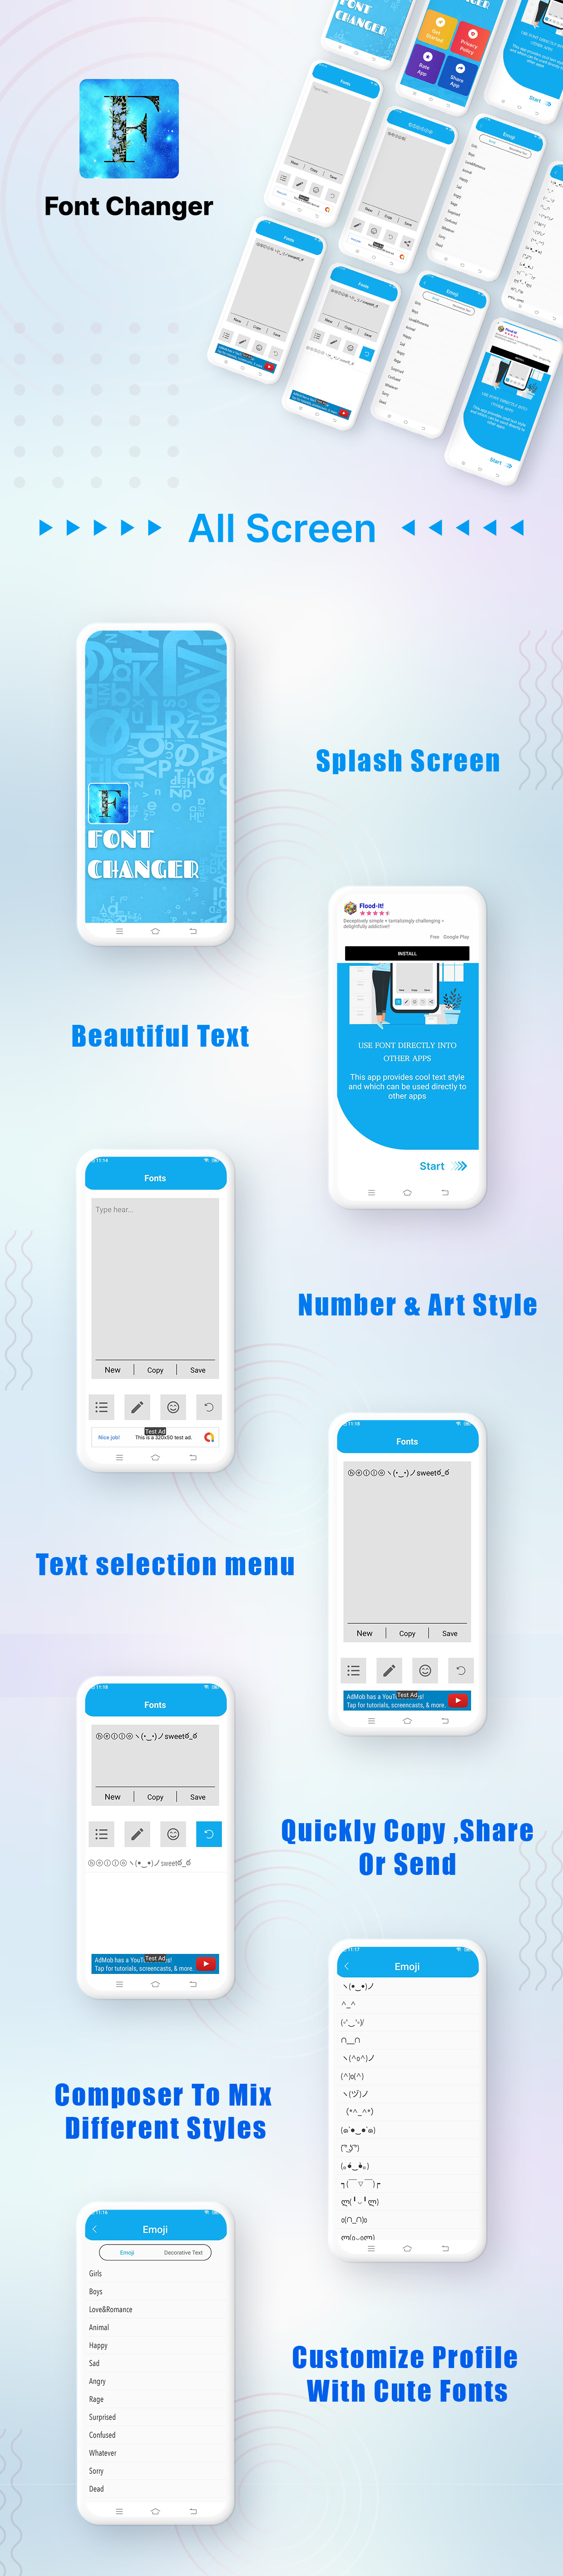 Font Changer | Text Maker | Android App | Admob Ads - 1